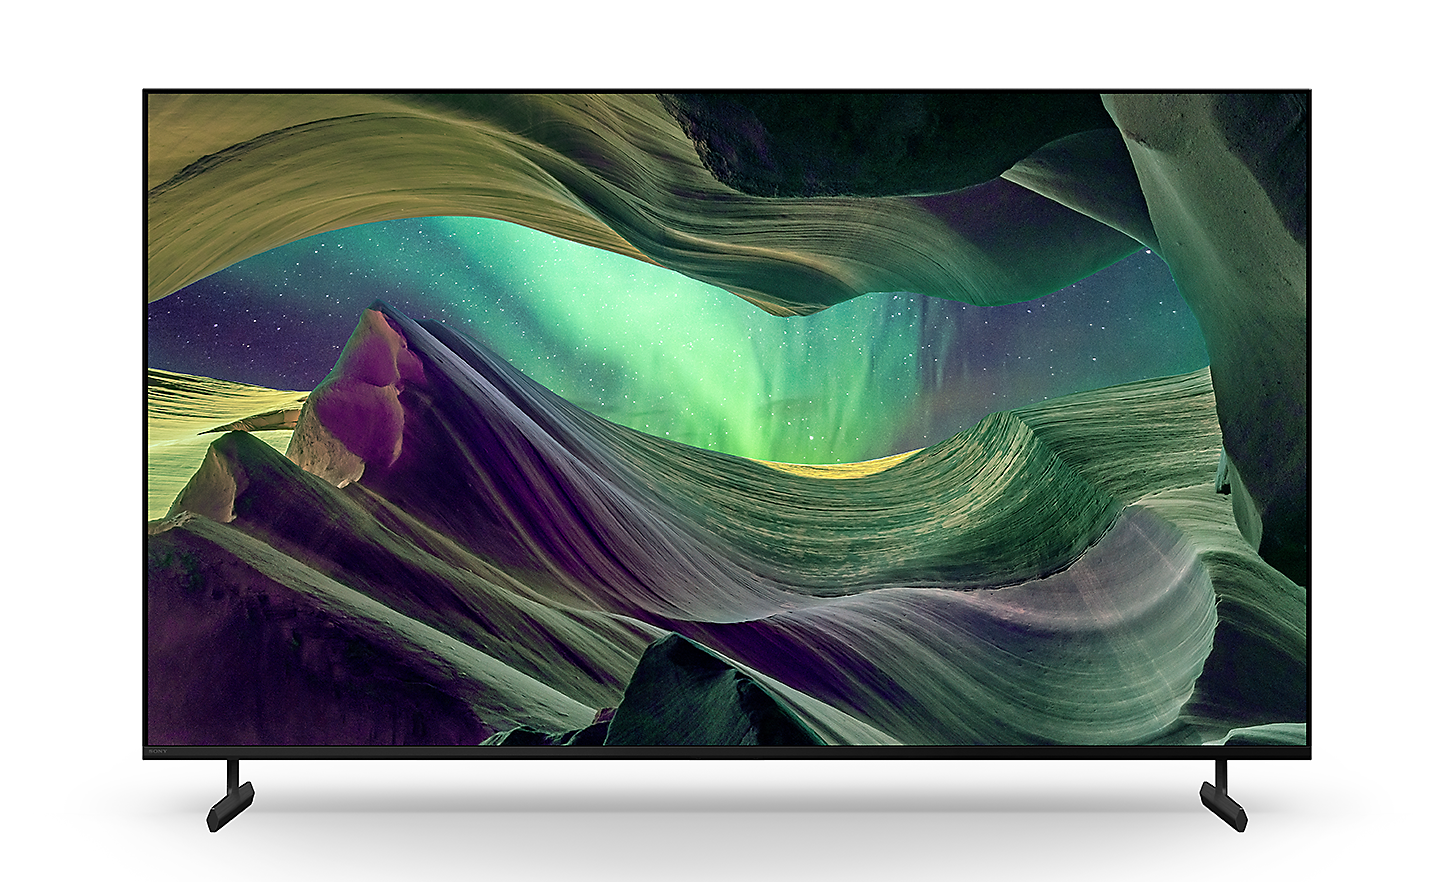 BRAVIA X85L TV on stand with screenshot of rock formations